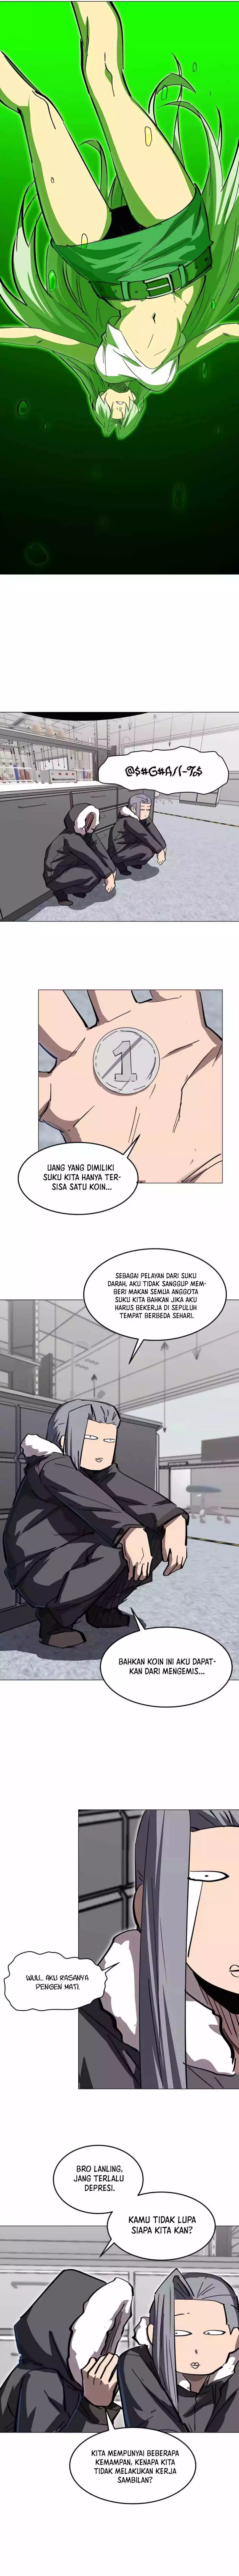 Mr. Zombie Chapter 54 Image 5